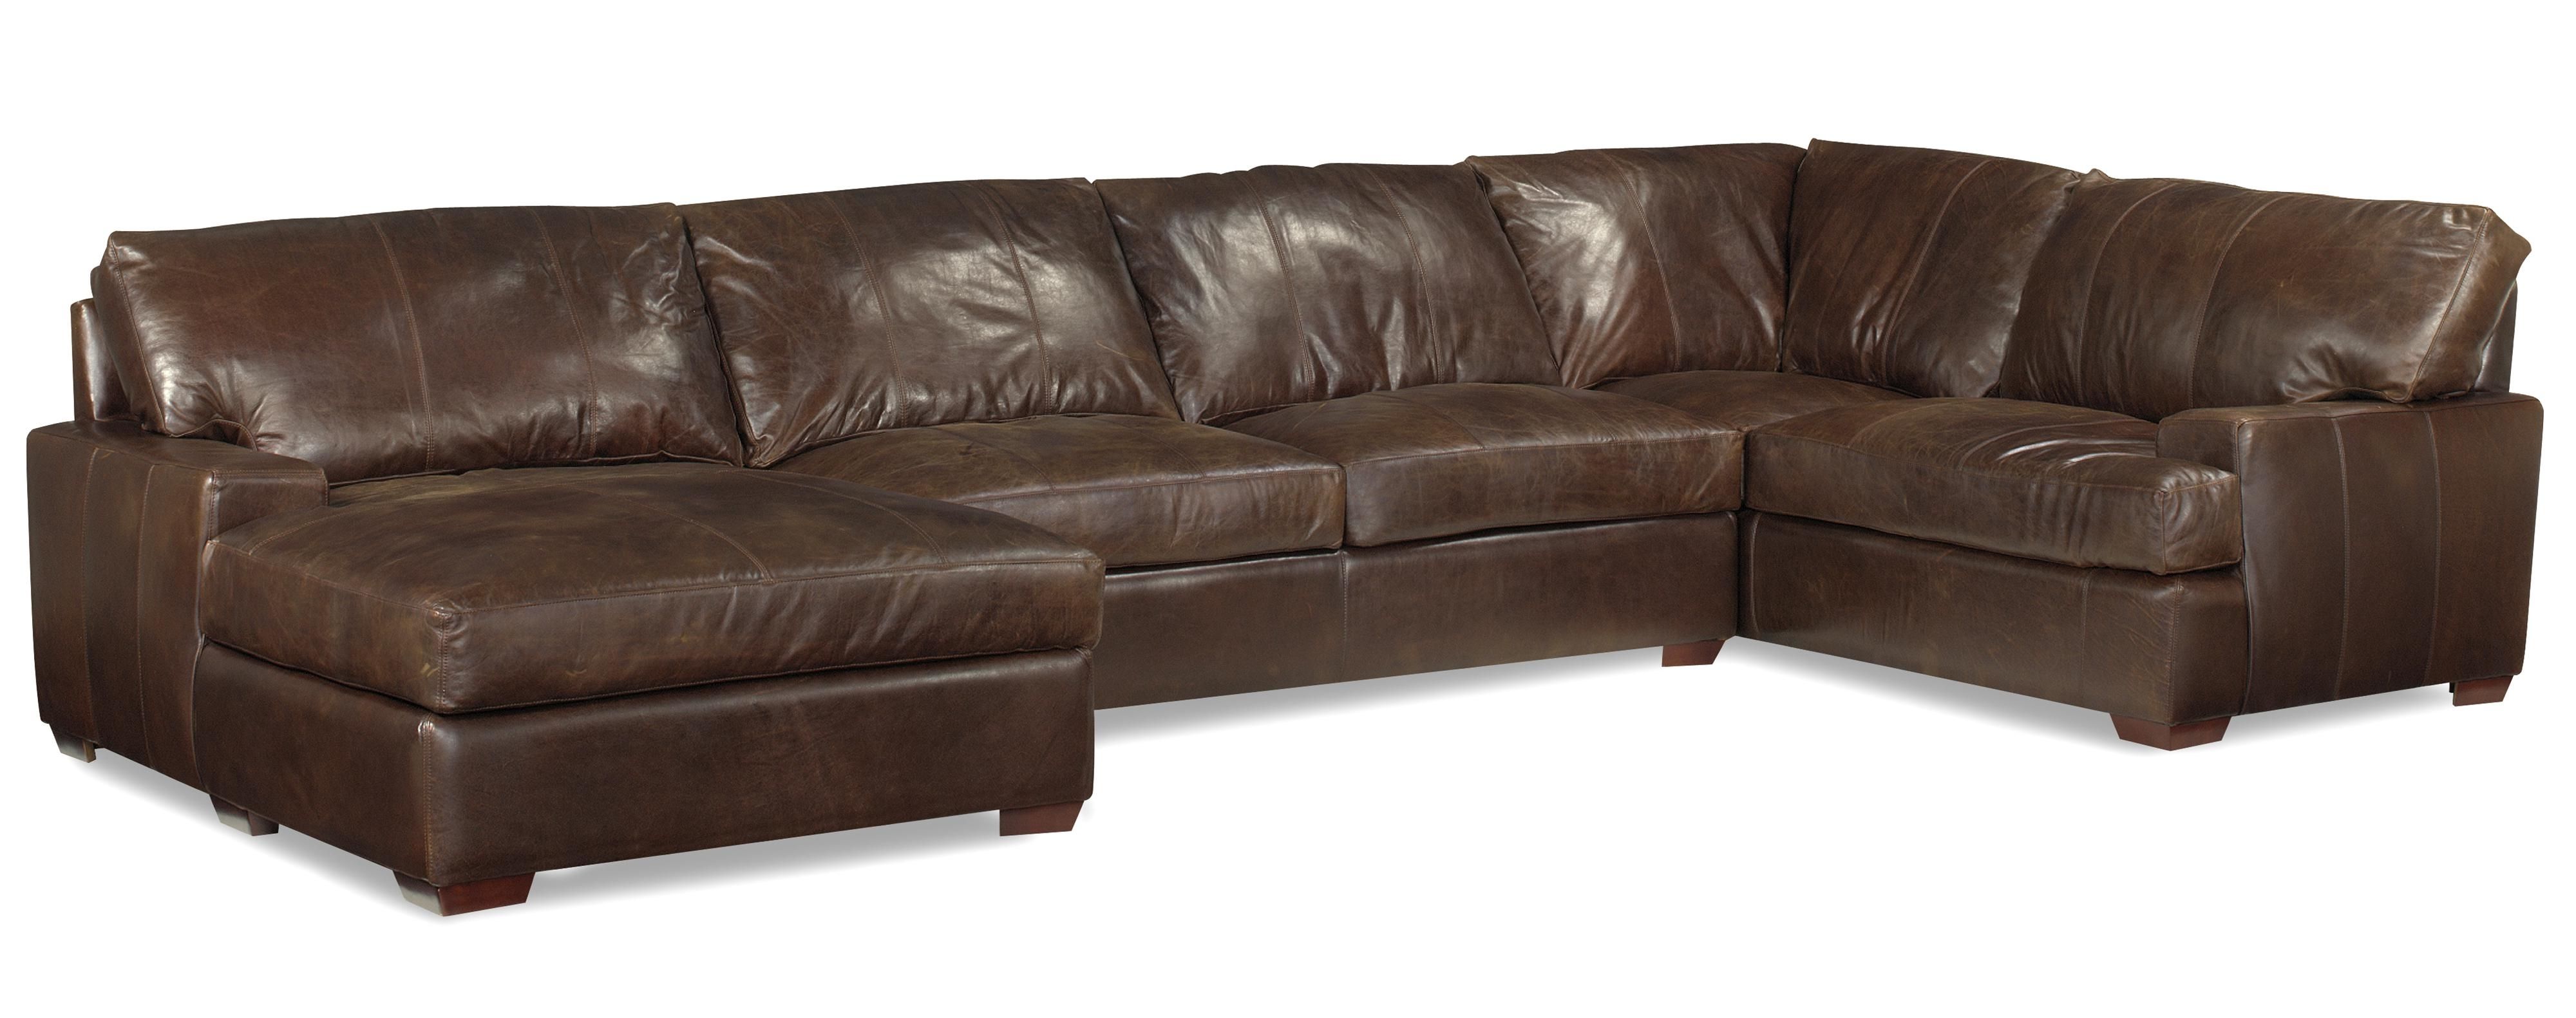 square genuine leather sectional sofa with chaise